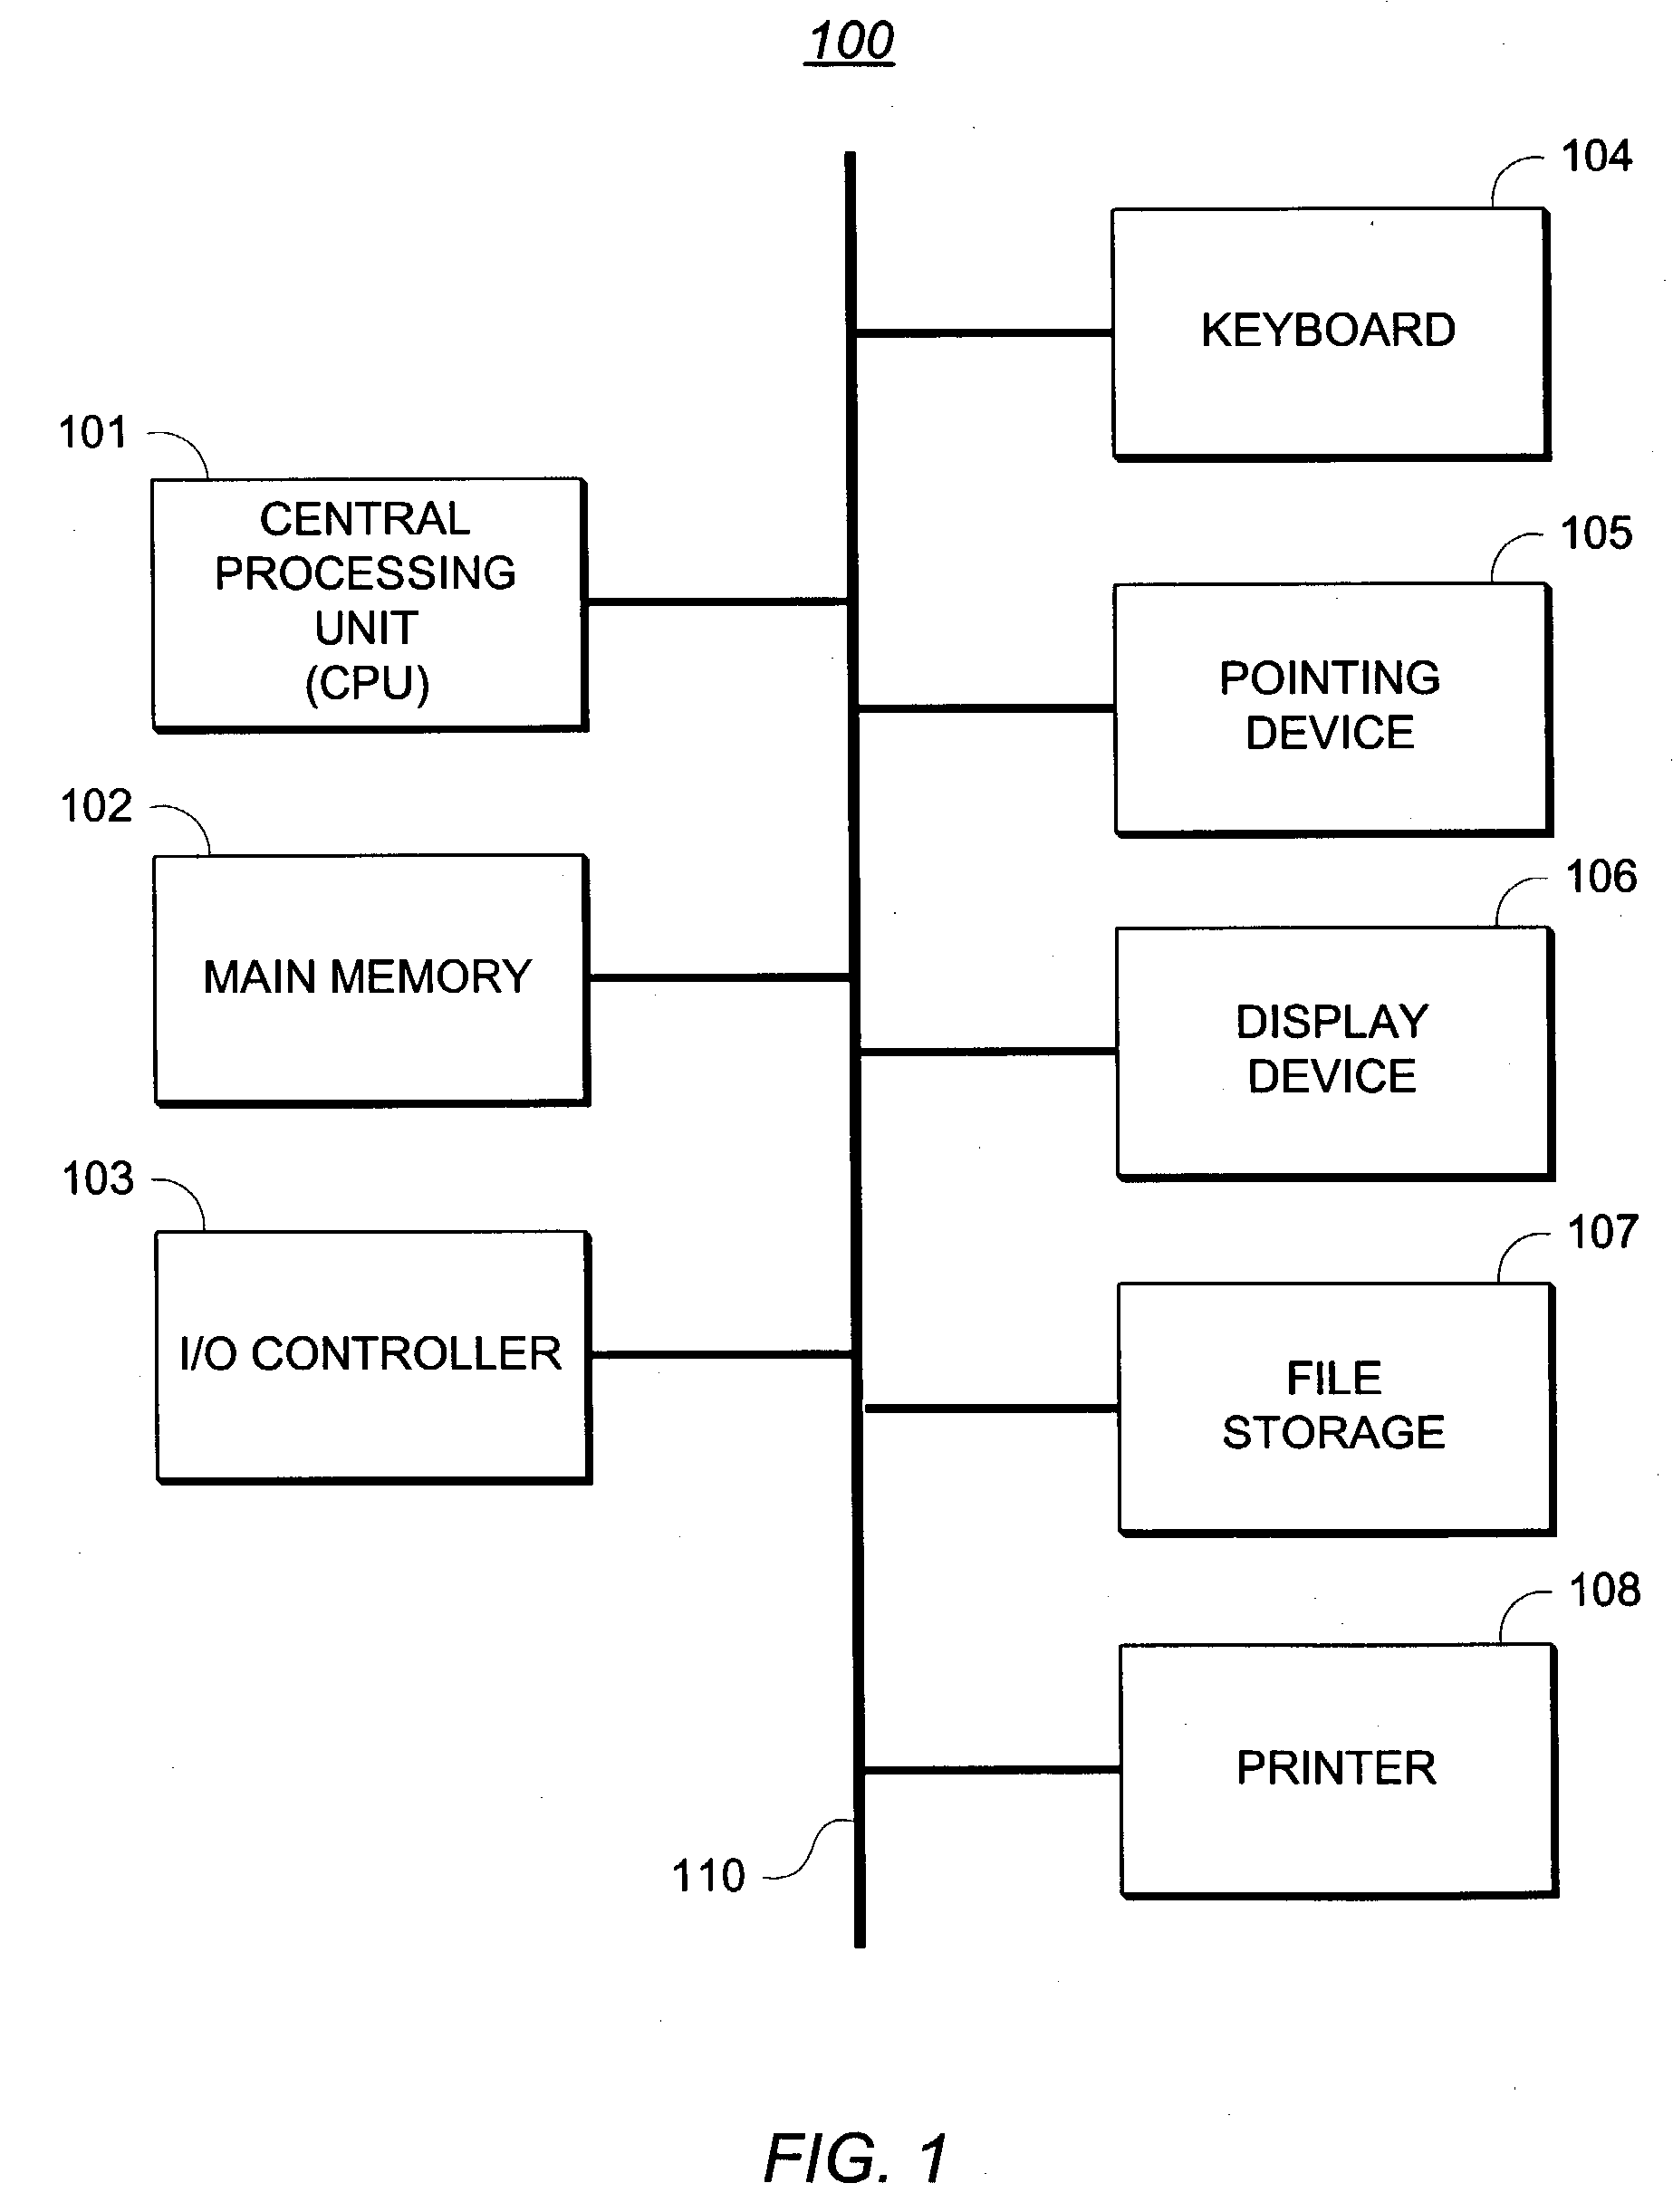 Method and apparatus for previewing GUI design and providing screen-to-source association